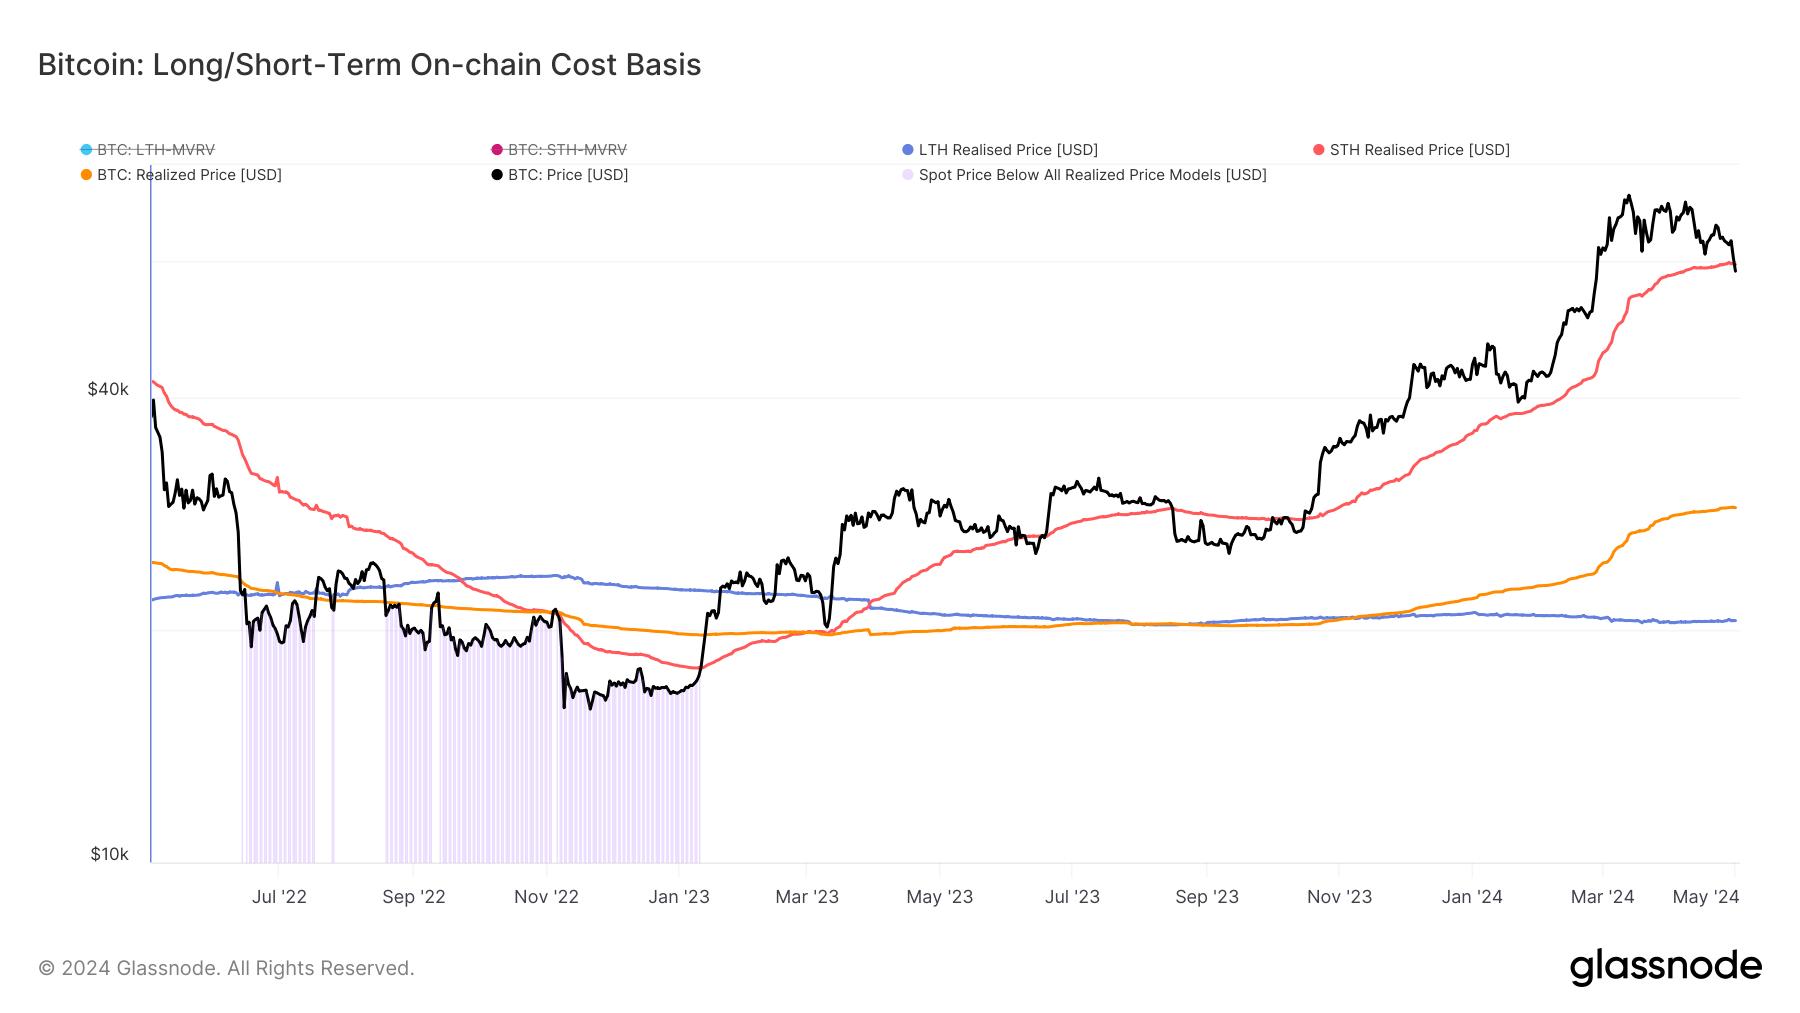 Long/Short-Term On-Chain Cost Basis: (Source: Glassnode)